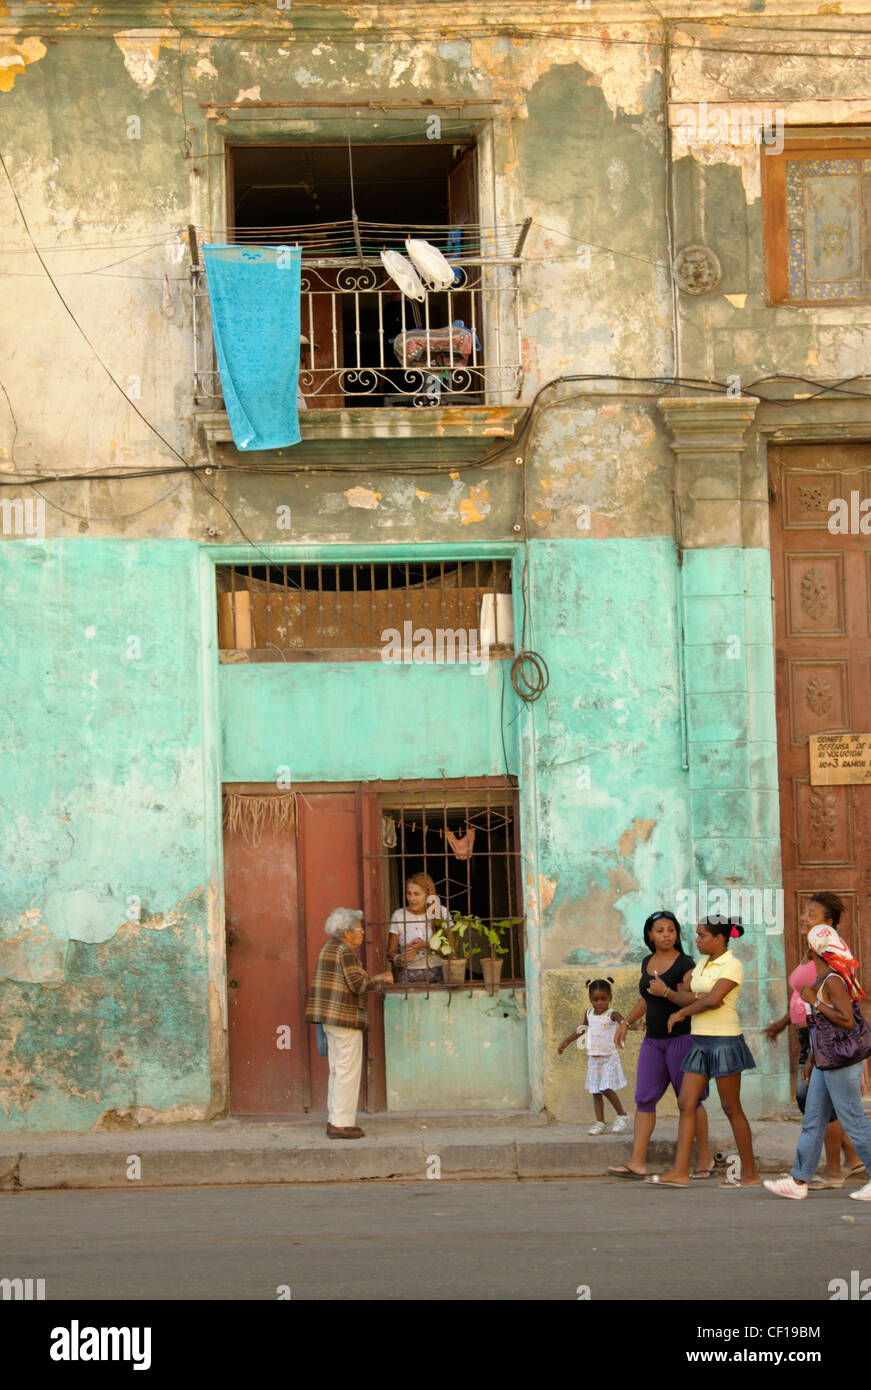 daily life in Cuba: people walking and talking on the street,Havana town Stock Photo